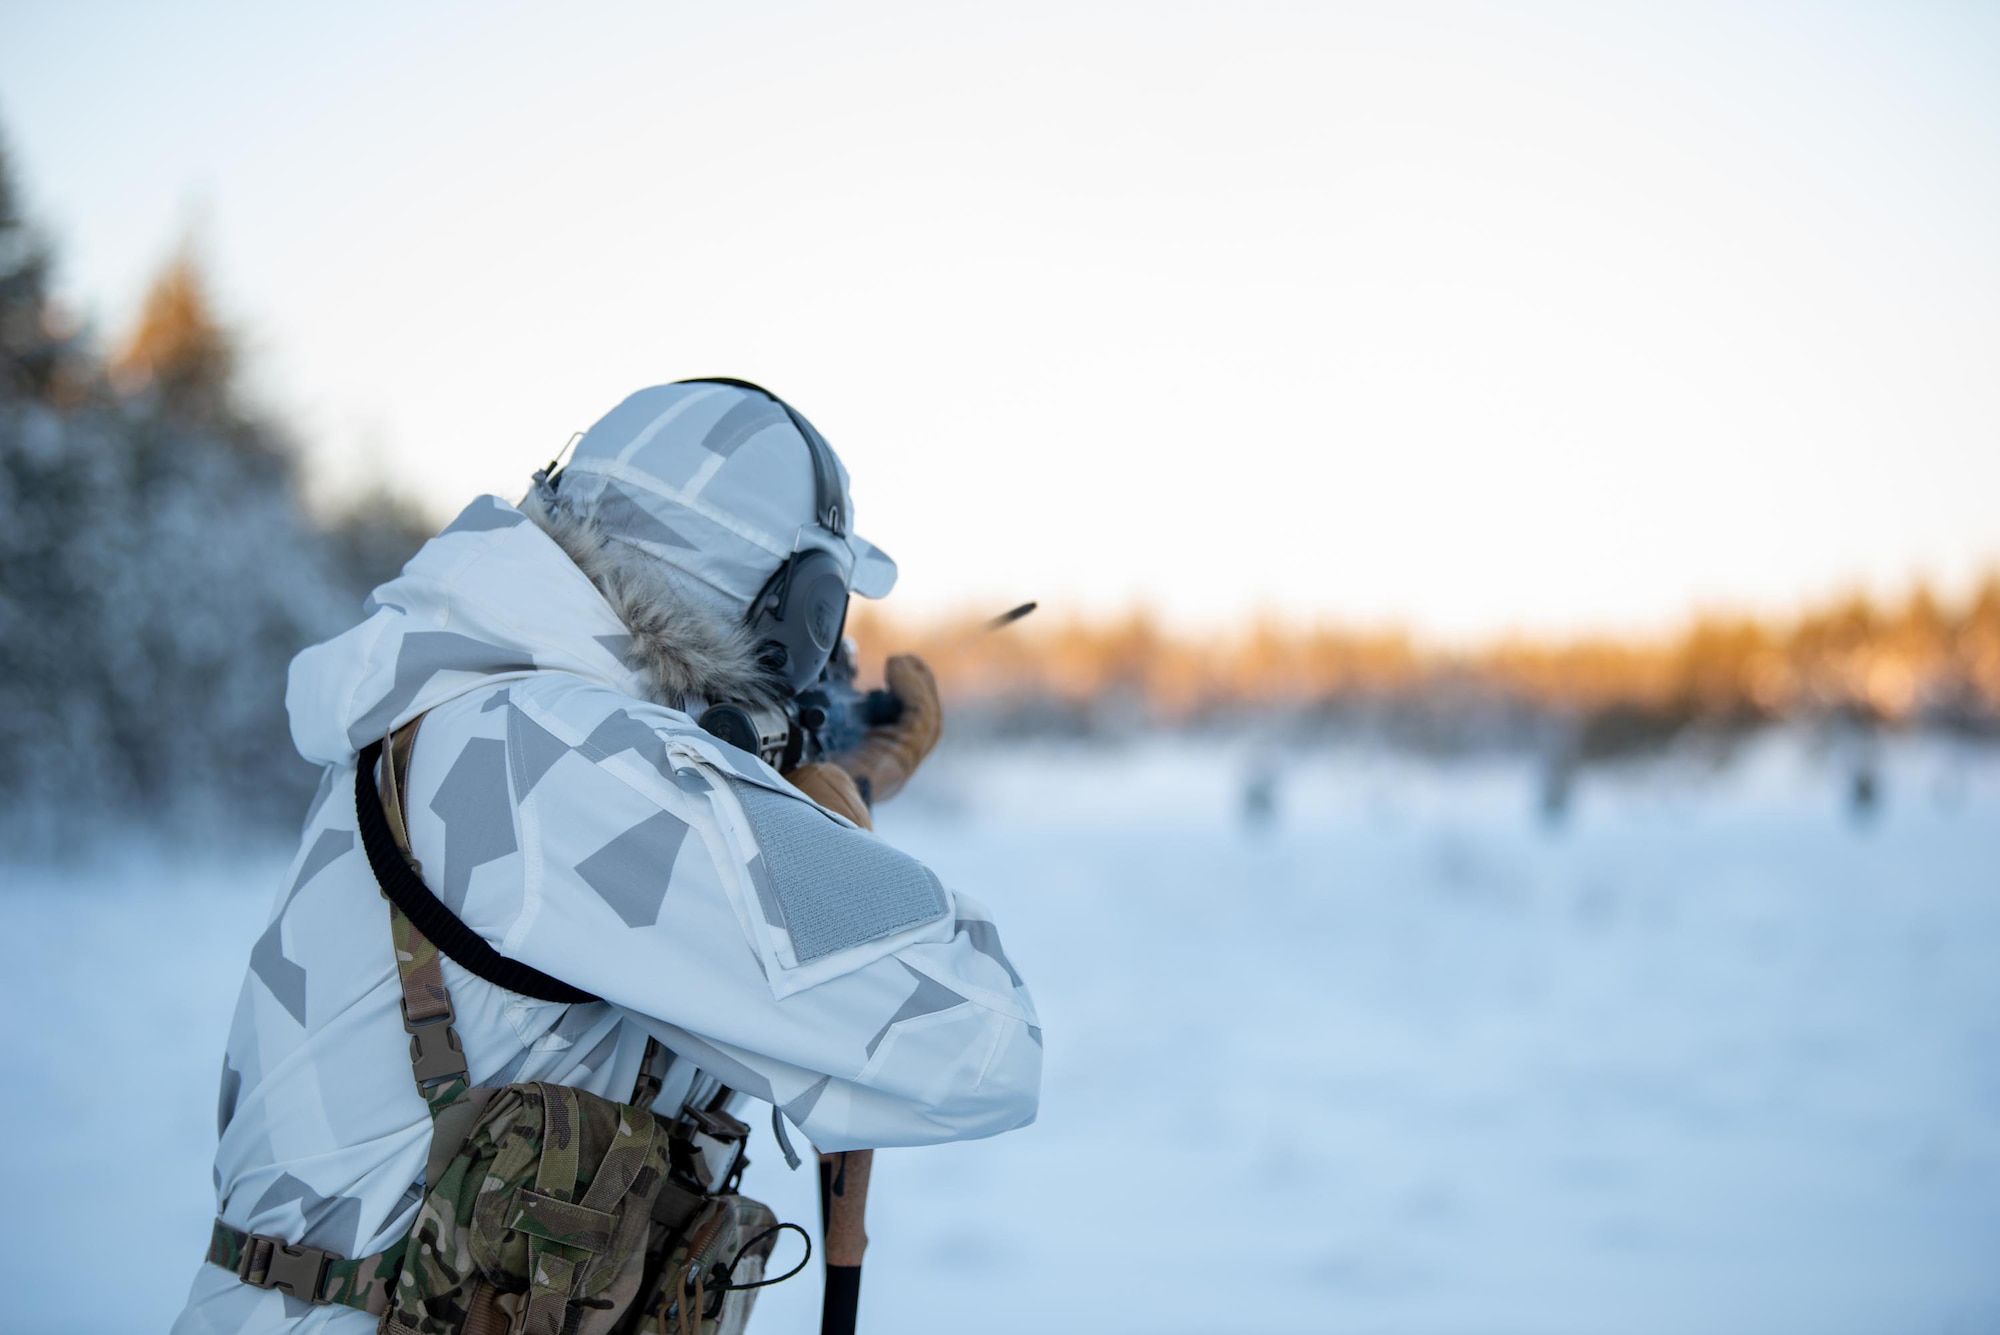 An Airman with the Kentucky Air National Guard’s 123rd Special Tactics Squadron fires a M4 rifle at a range in Grubbnäsudden, Sweden, Jan. 13, 2022. Fifteen members from the 123rd STS — including combat controllers; pararescuemen; special reconnaissance personnel; search, evasion, resistance and escape troops; and support Airmen — came here to build upon their relationship with European partners during an arctic warfare training course. (U.S. Air National Guard photo by Phil Speck)